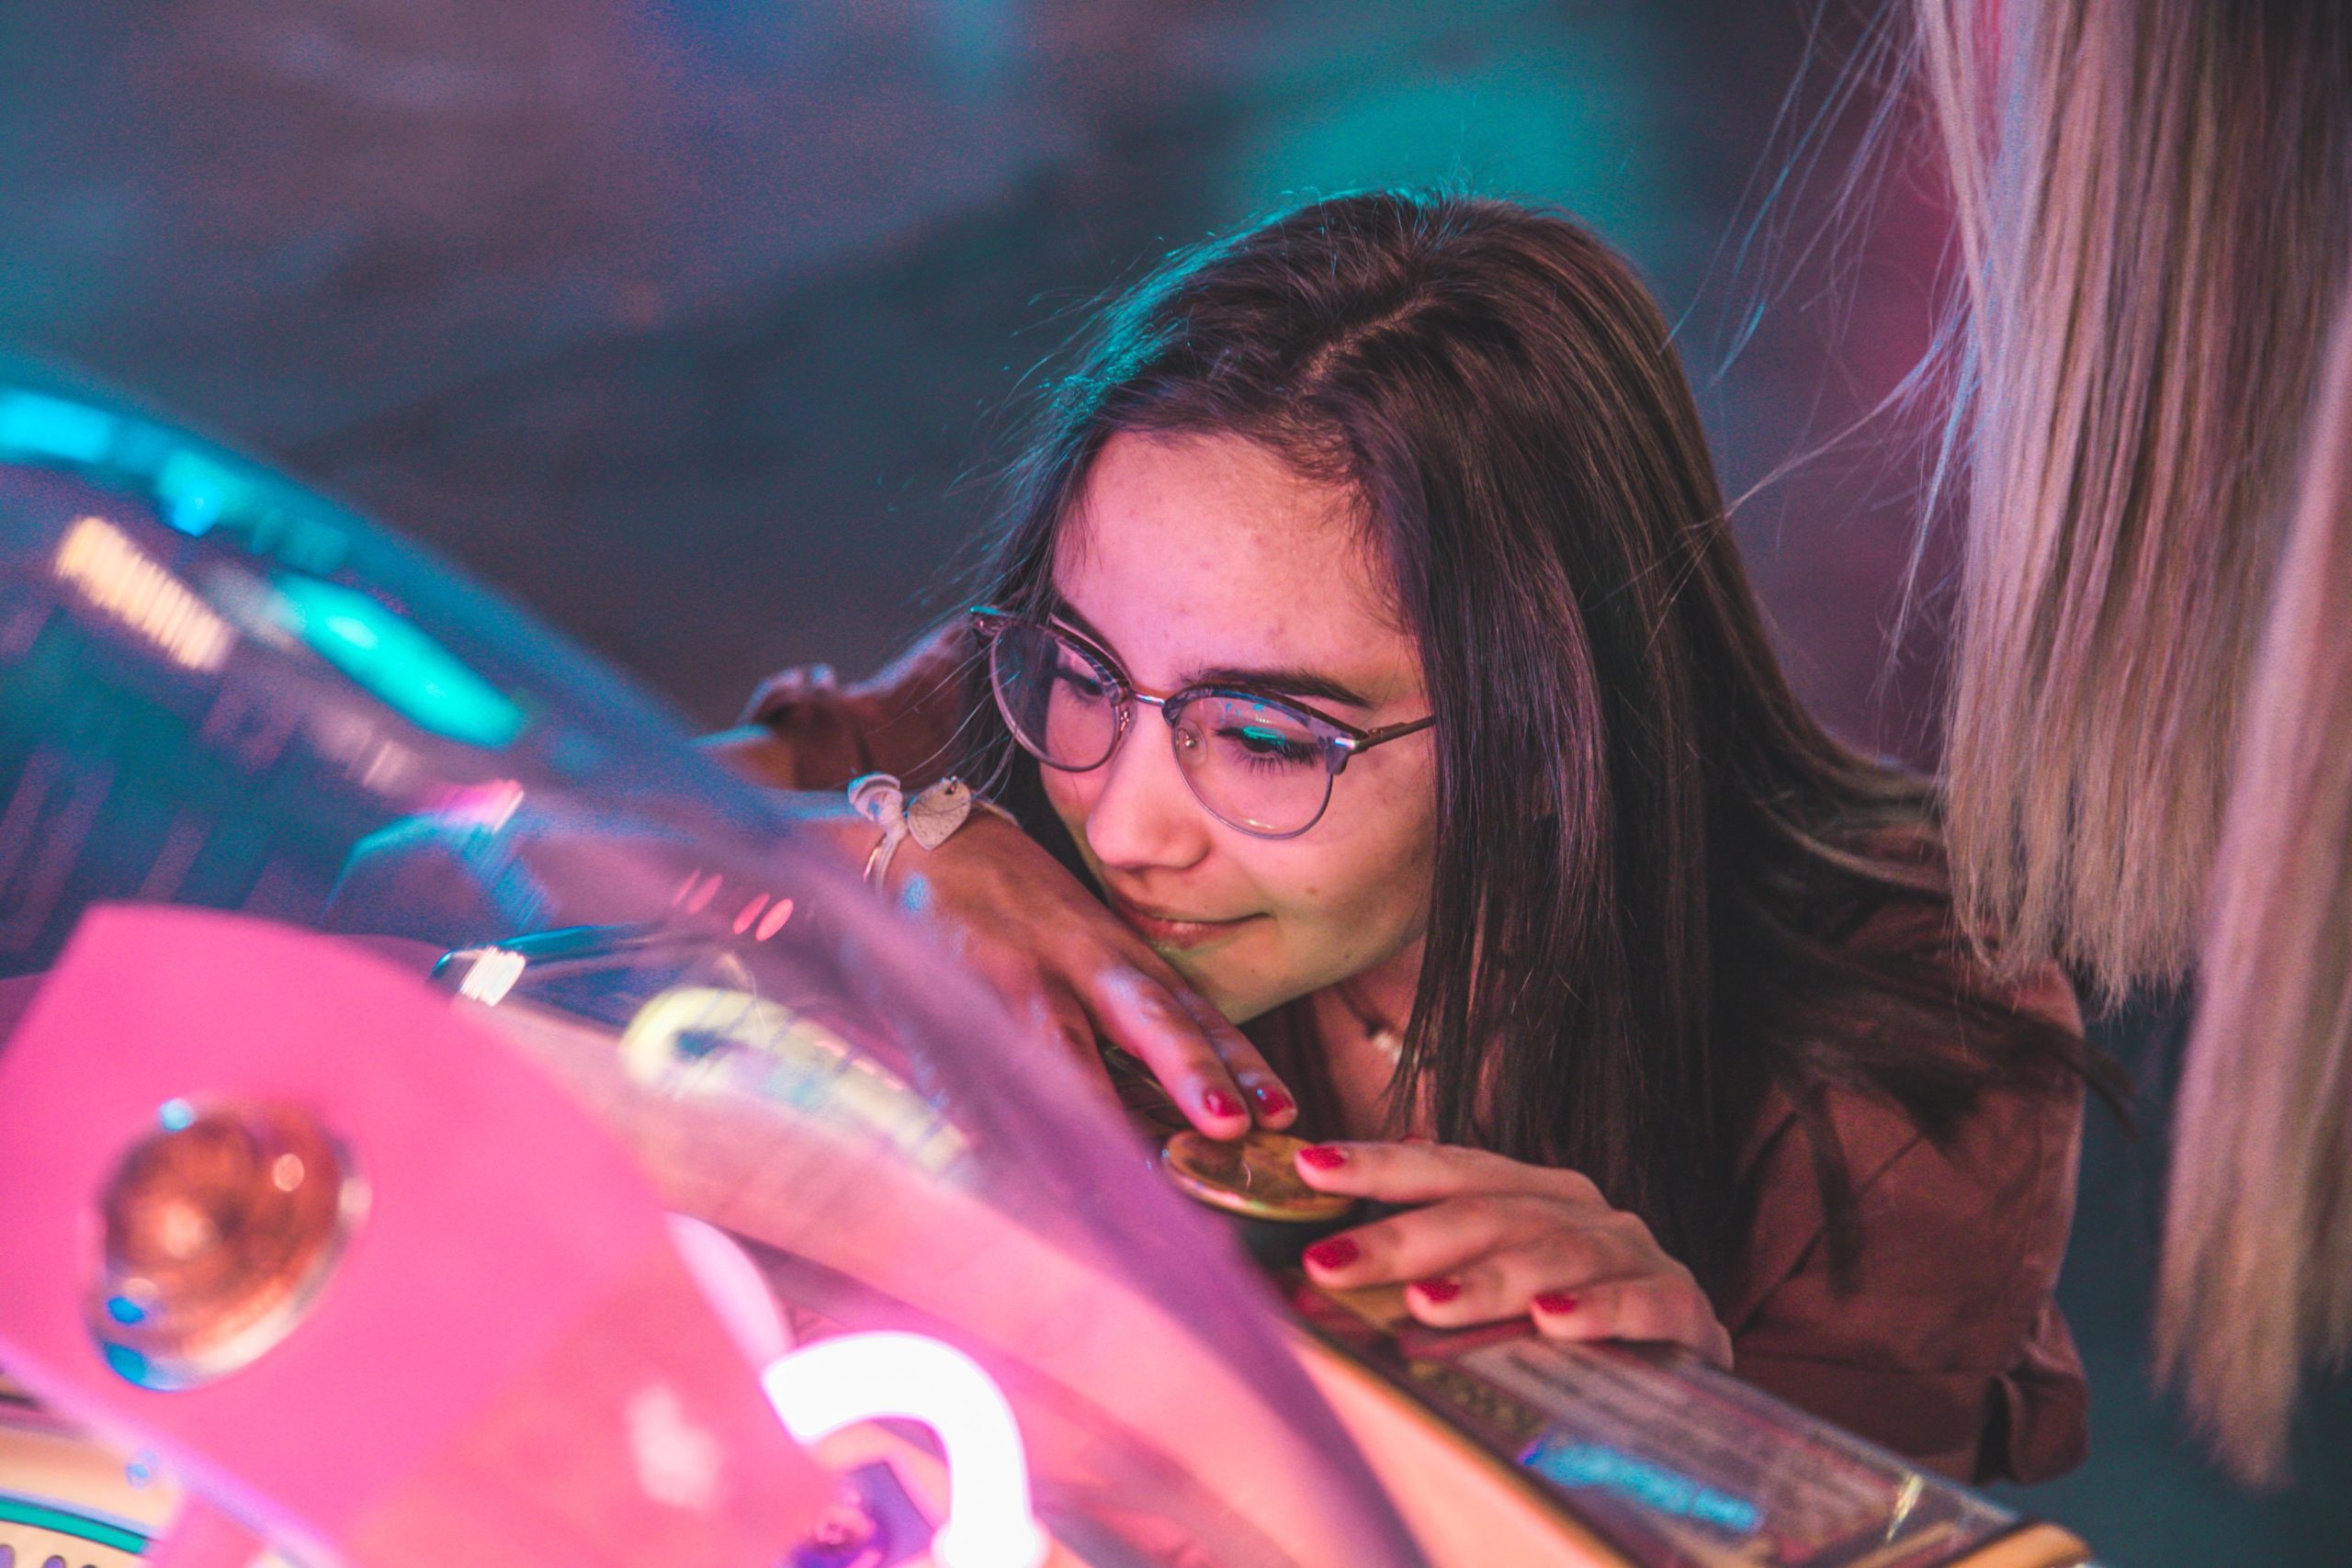 A girl closely inspecting a colorfully-lit machine.